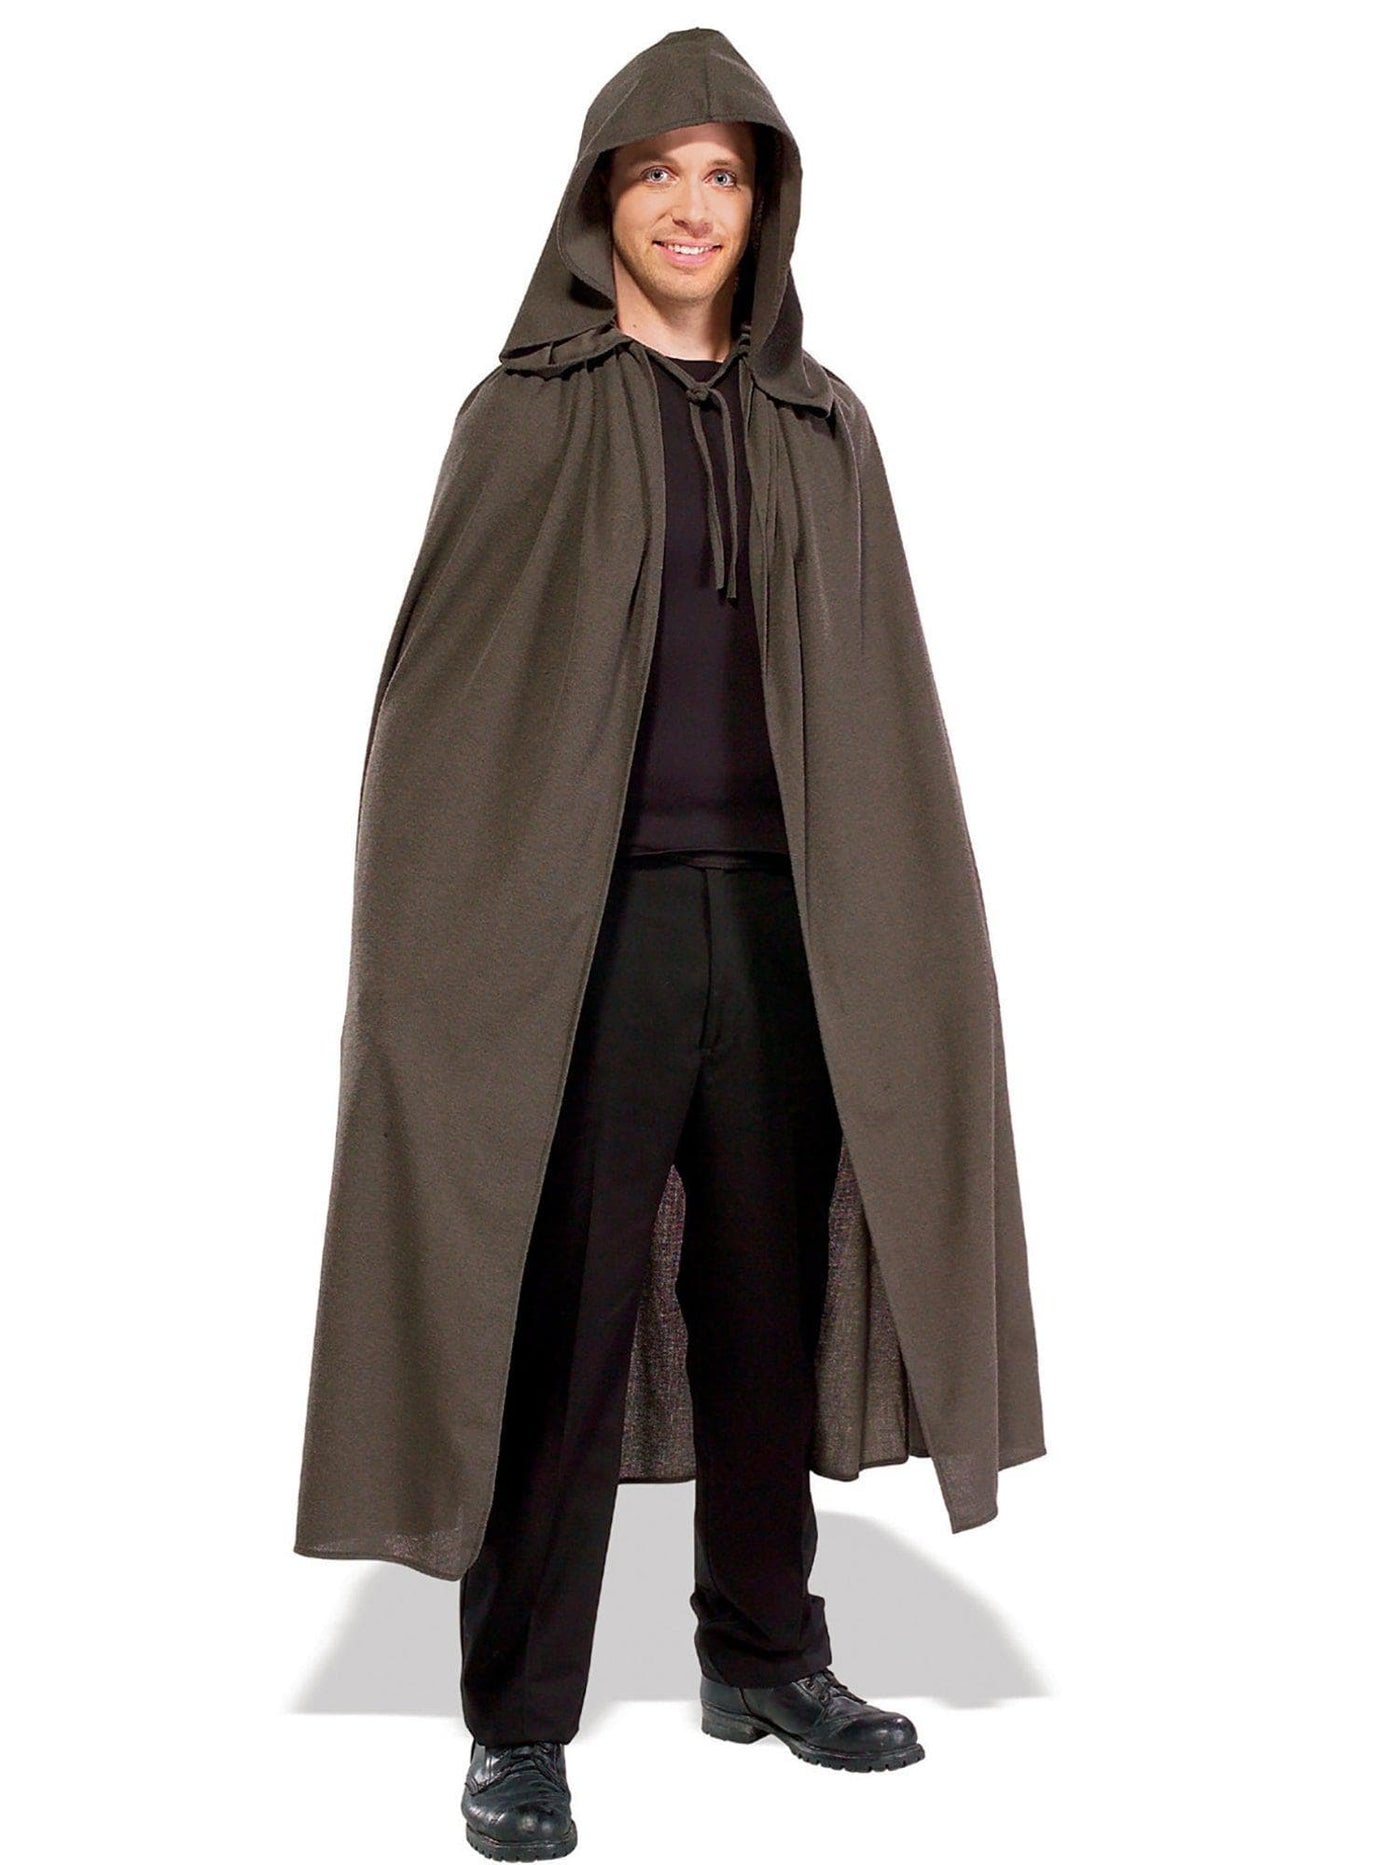 The Lord Of The Rings Elven Cloak Adult